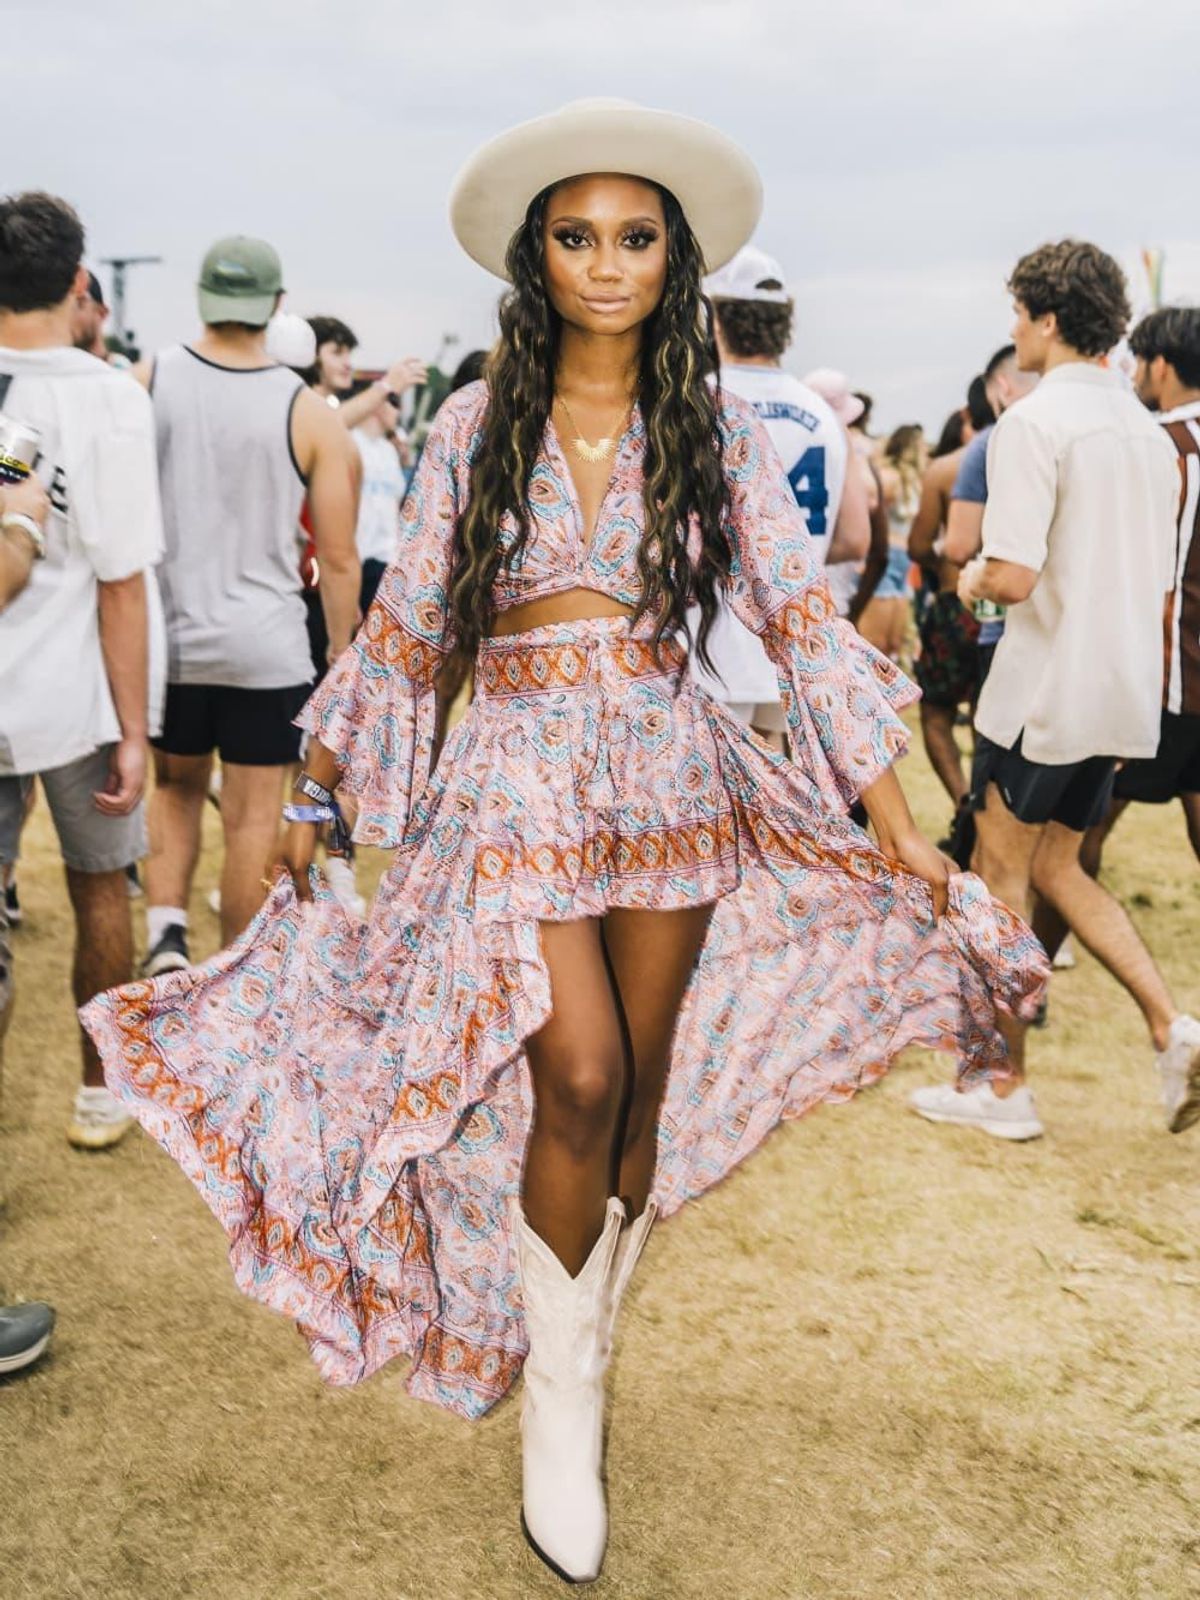 ACL Festival Outfits - It's All Chic to Me